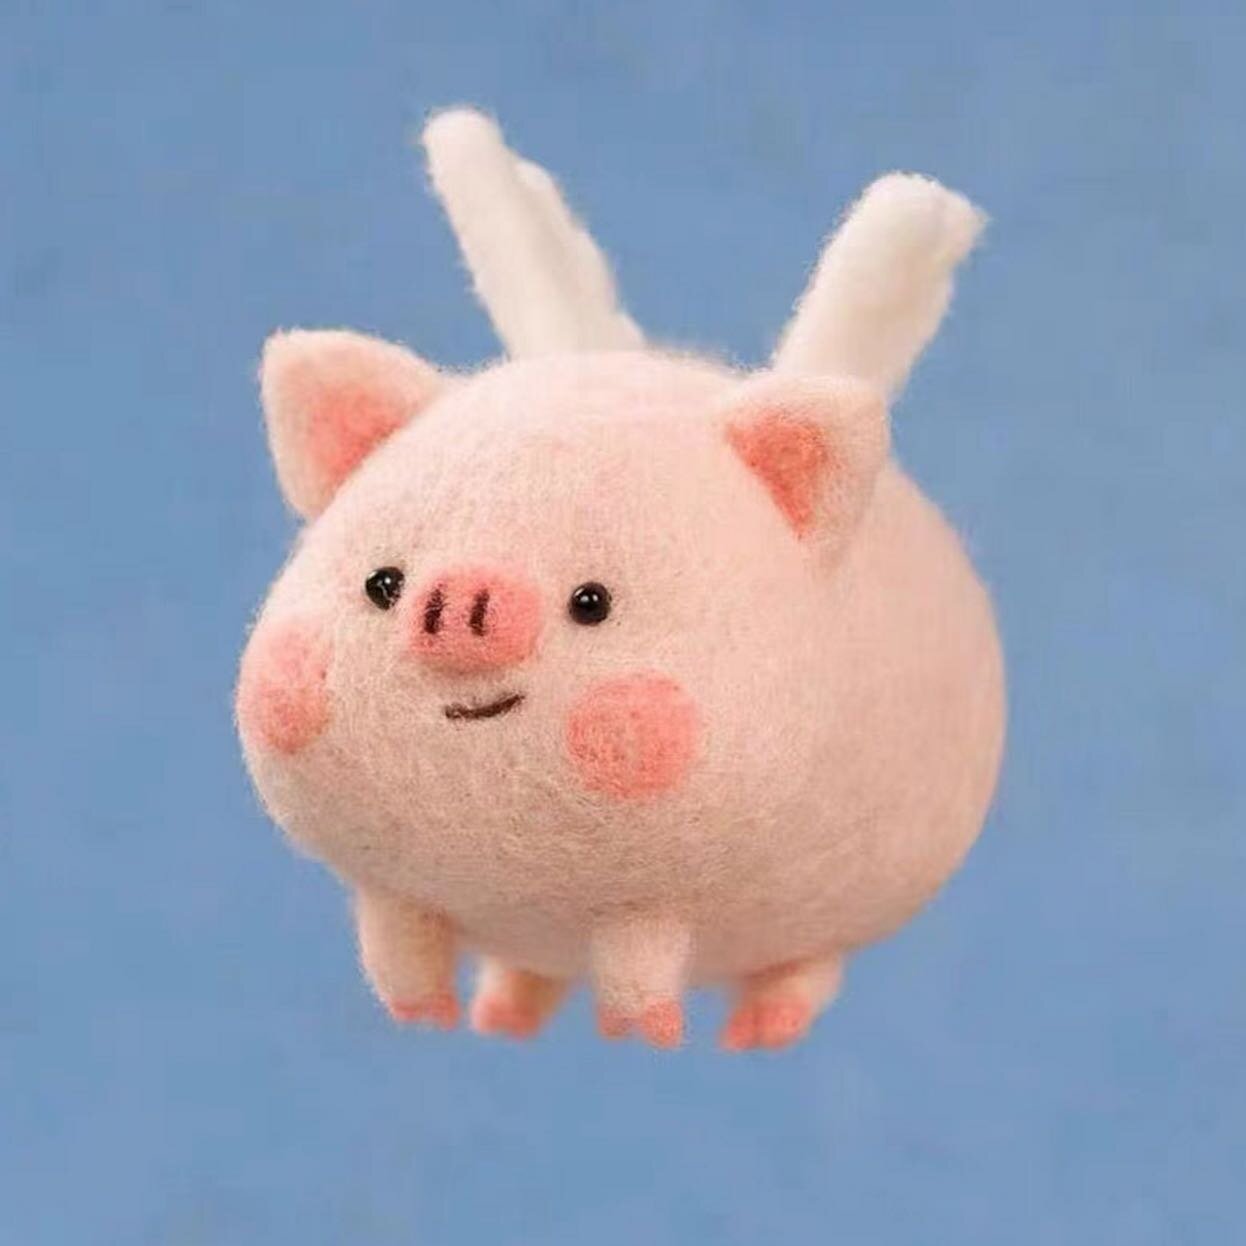 🐷 March FELT CLUB: When Pigs Fly!
🐽 Sunday, March 24, 1-4pm
💗 Location: @zuckercreme 414 SE 81st Ave in Montavilla

Ever since Charlotte&rsquo;s Web I have been partial to pigs. They&rsquo;re such a great looking animal, from the most simplified t